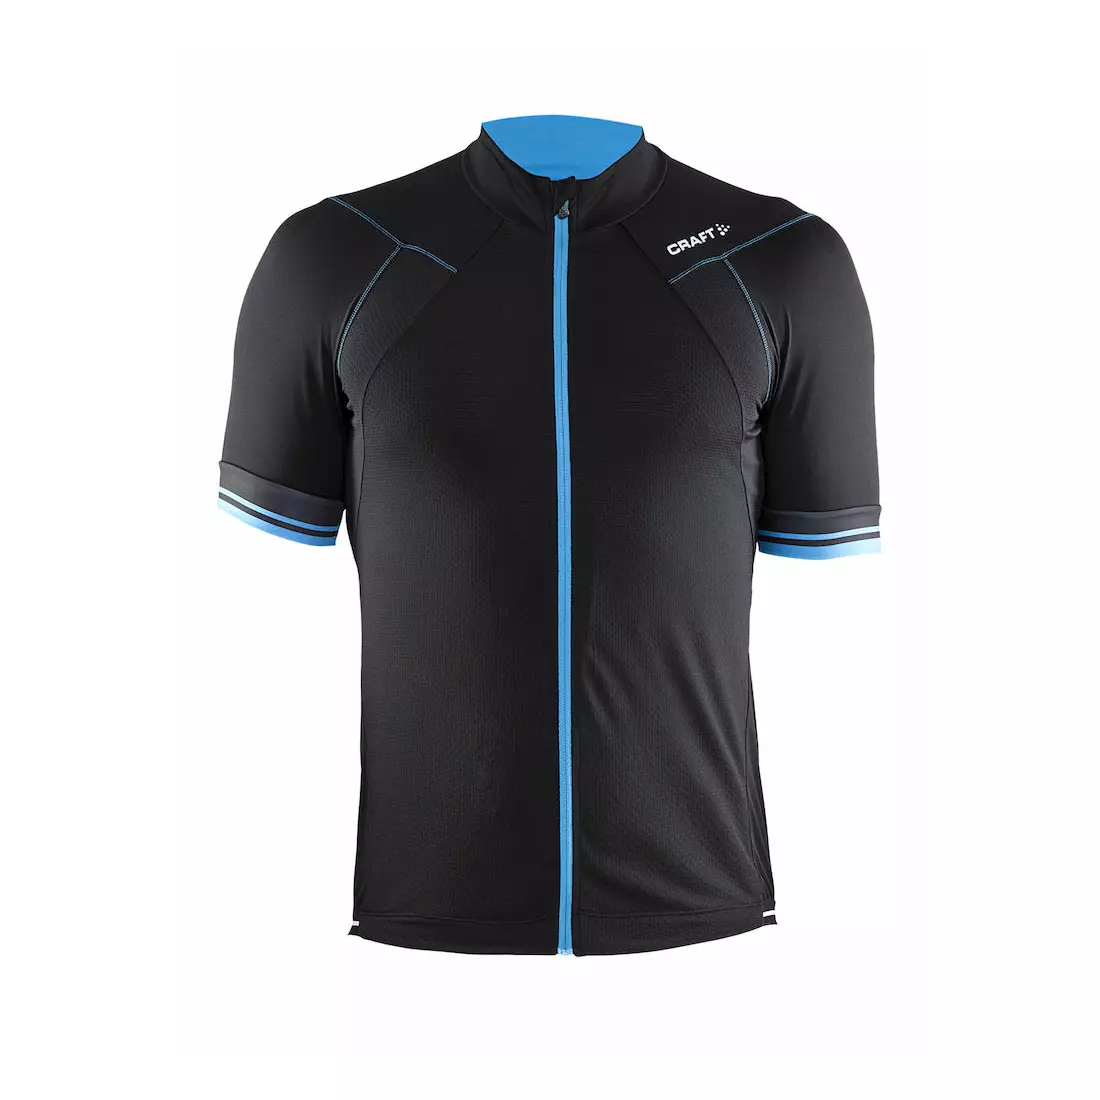 CRAFT PUNCHEUR cycling jersey 1903294-9317